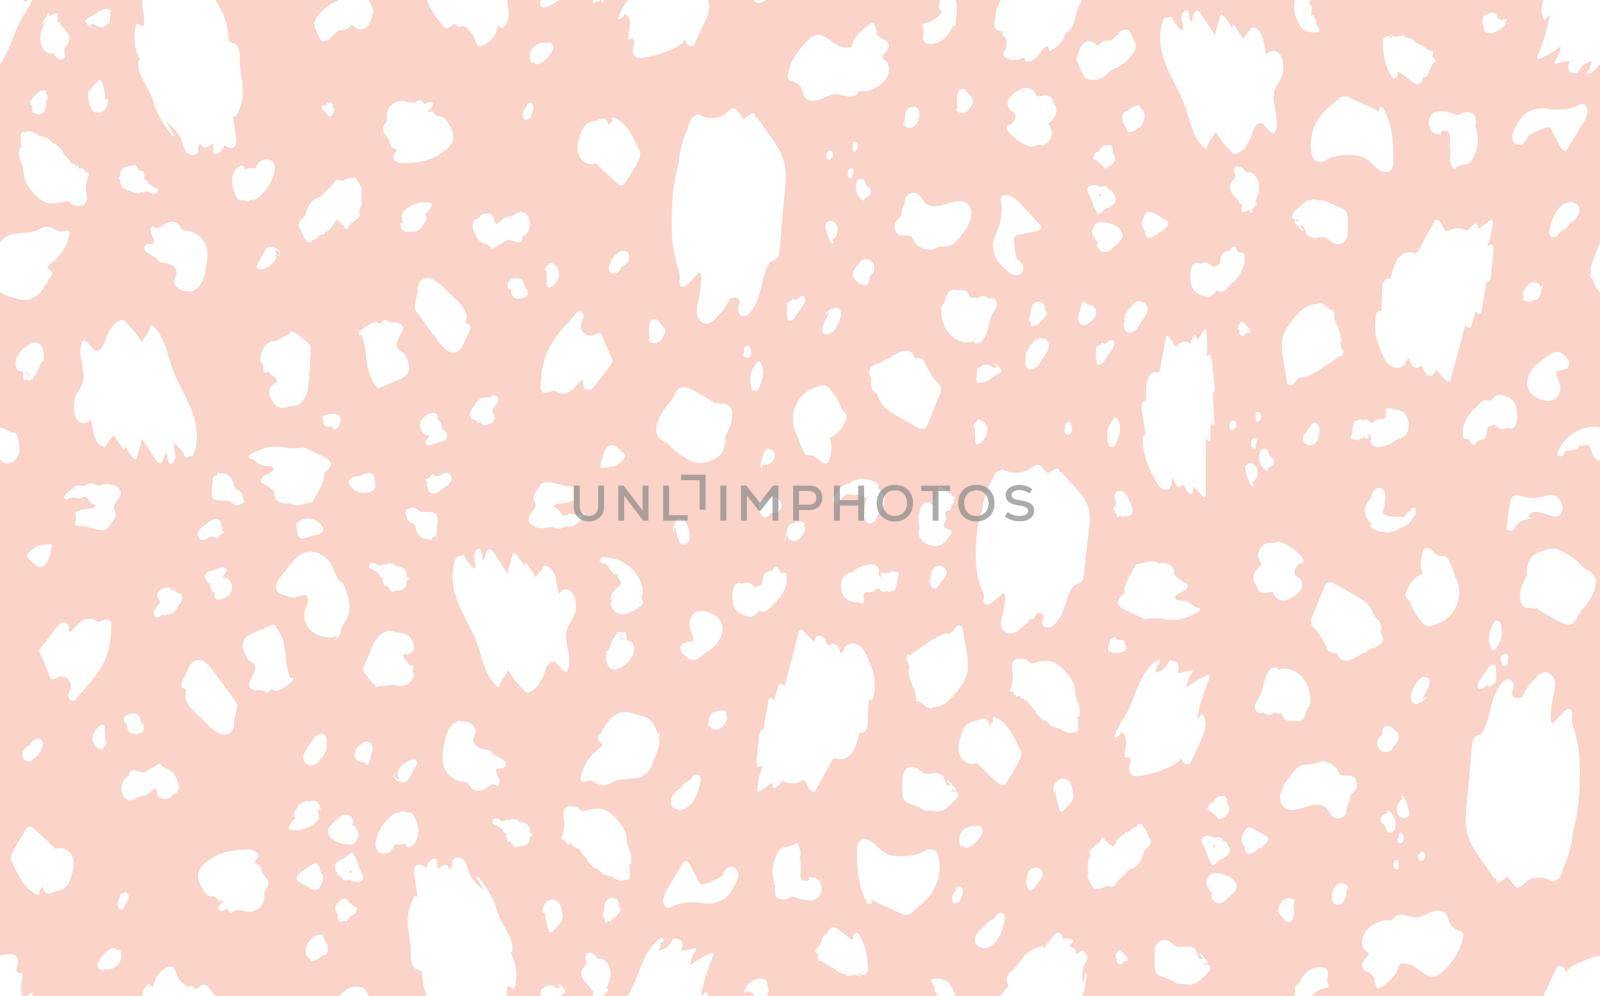 Abstract modern leopard seamless pattern. Animals trendy background. Pink and white decorative vector stock illustration for print, card, postcard, fabric, textile. Modern ornament of stylized skin by allaku